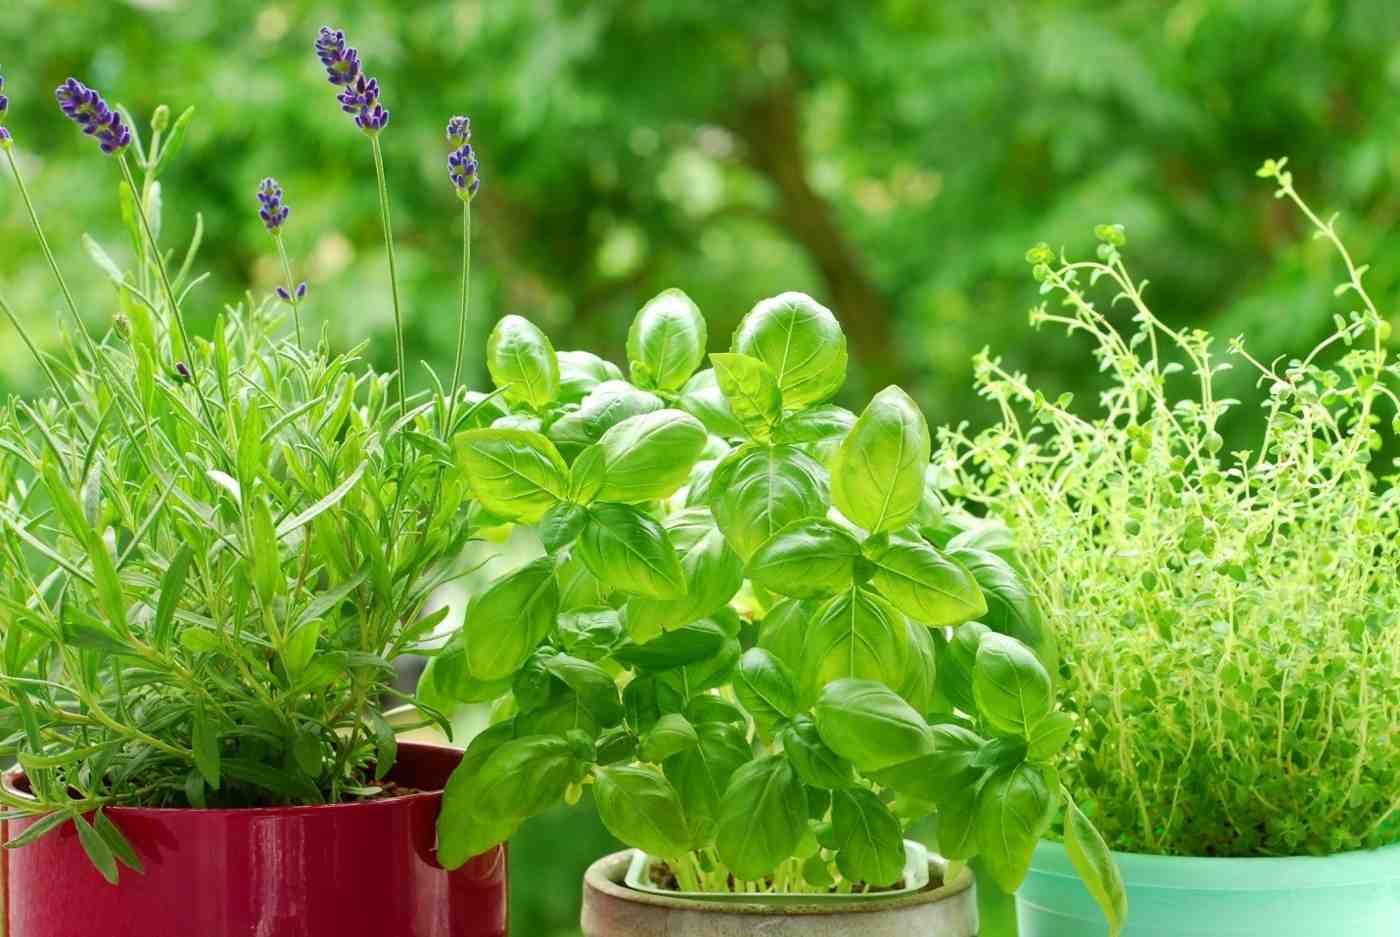 Herbs for flying control - Basil, Oregano, Rosemary, Thyme, Minze